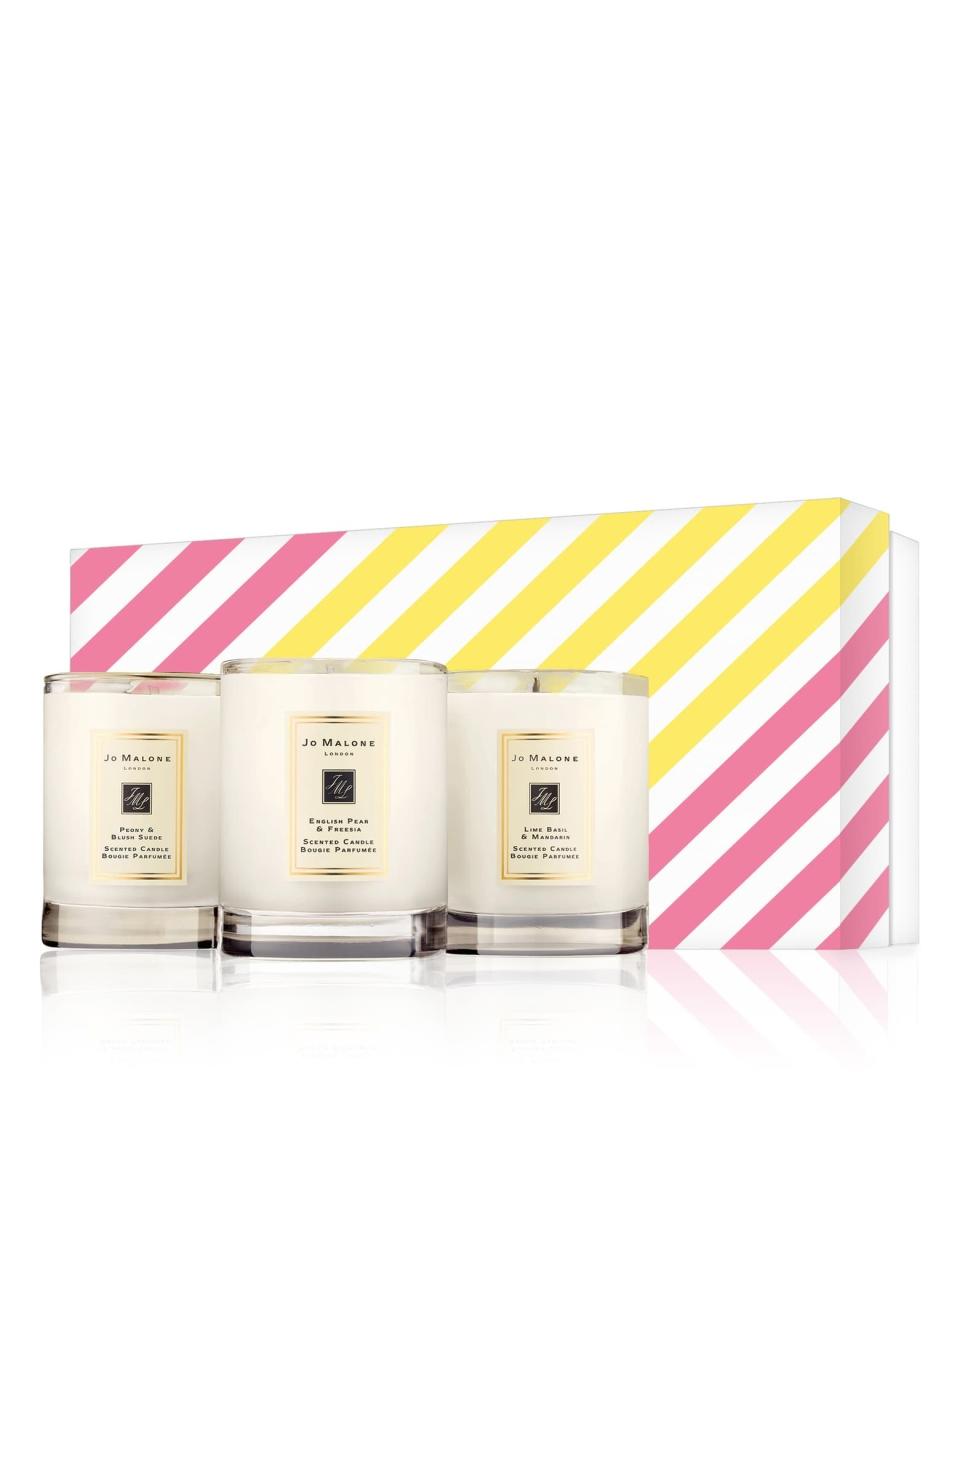 Jo Malone London Travel Candle Collection